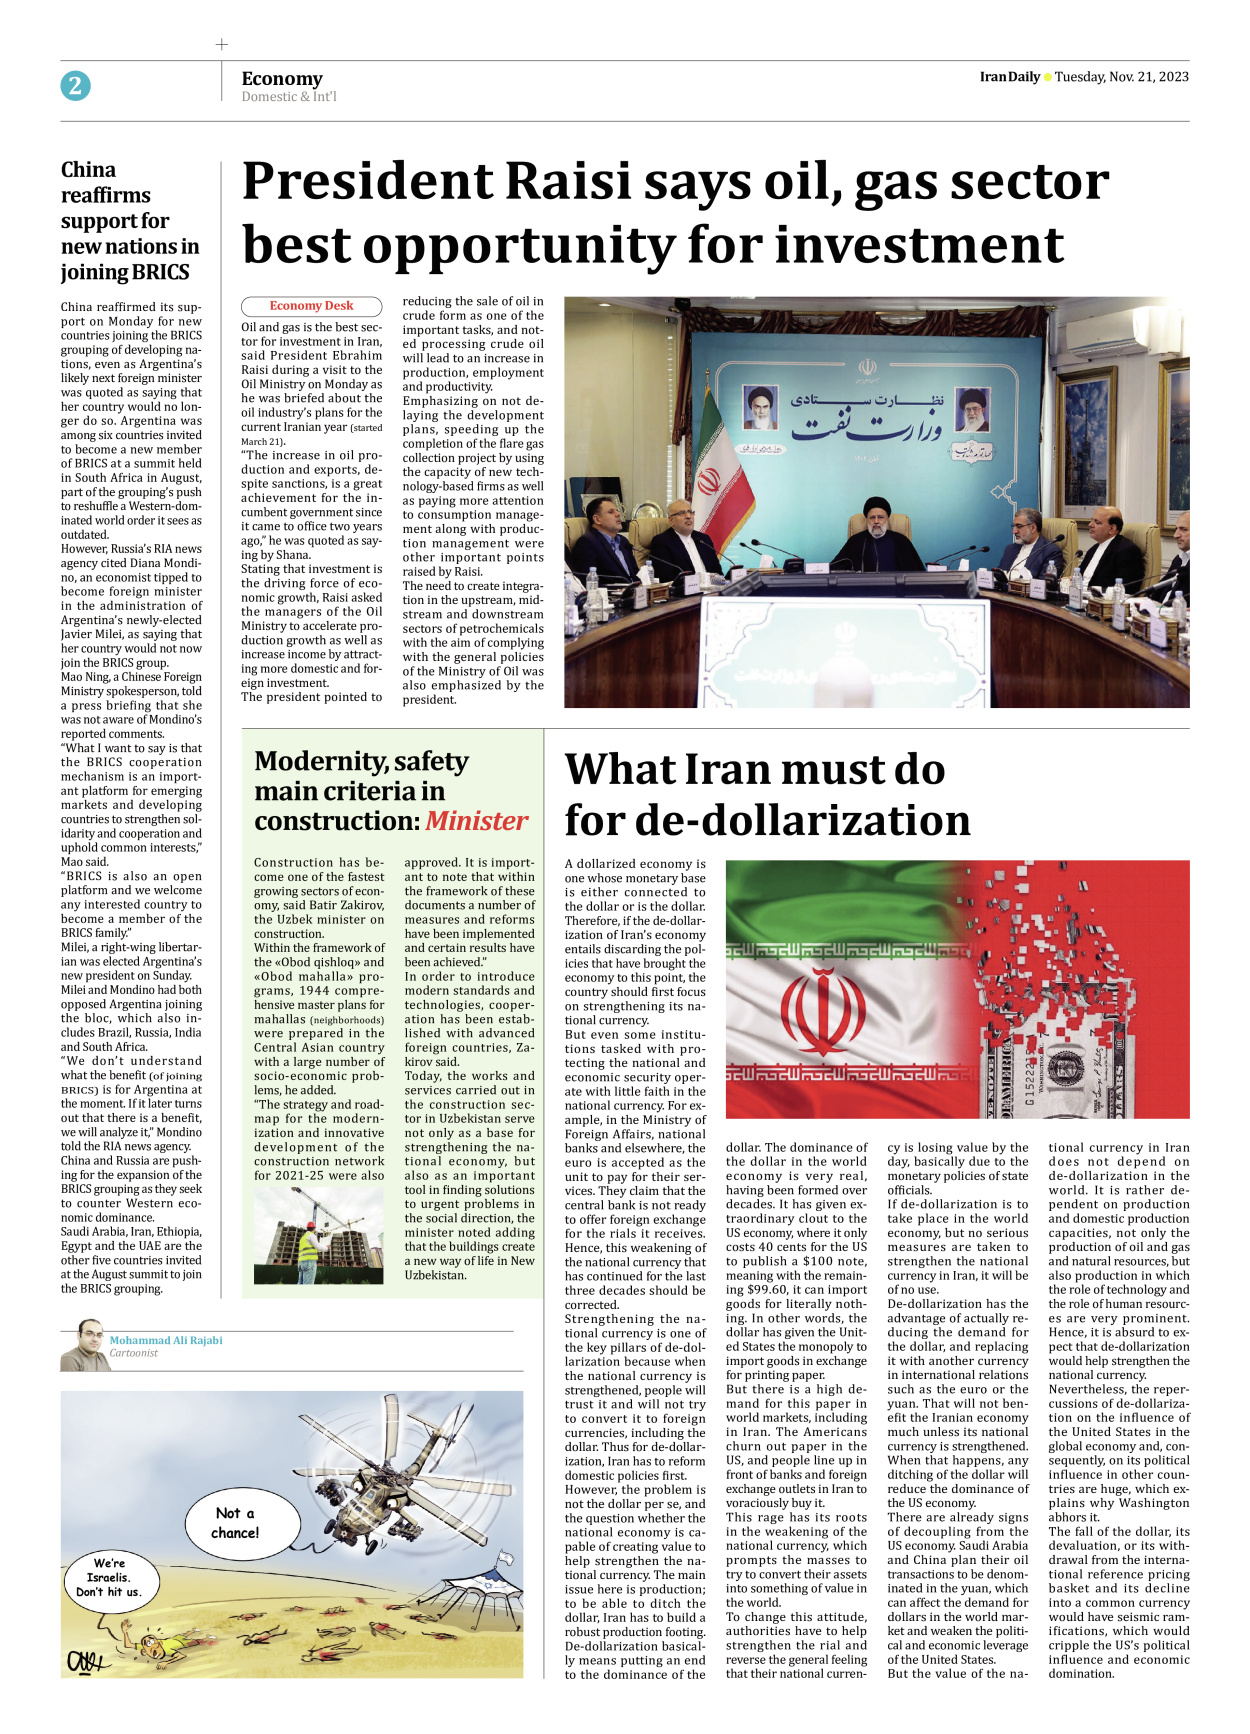 Iran Daily - Number Seven Thousand Four Hundred and Forty - 21 November 2023 - Page 2